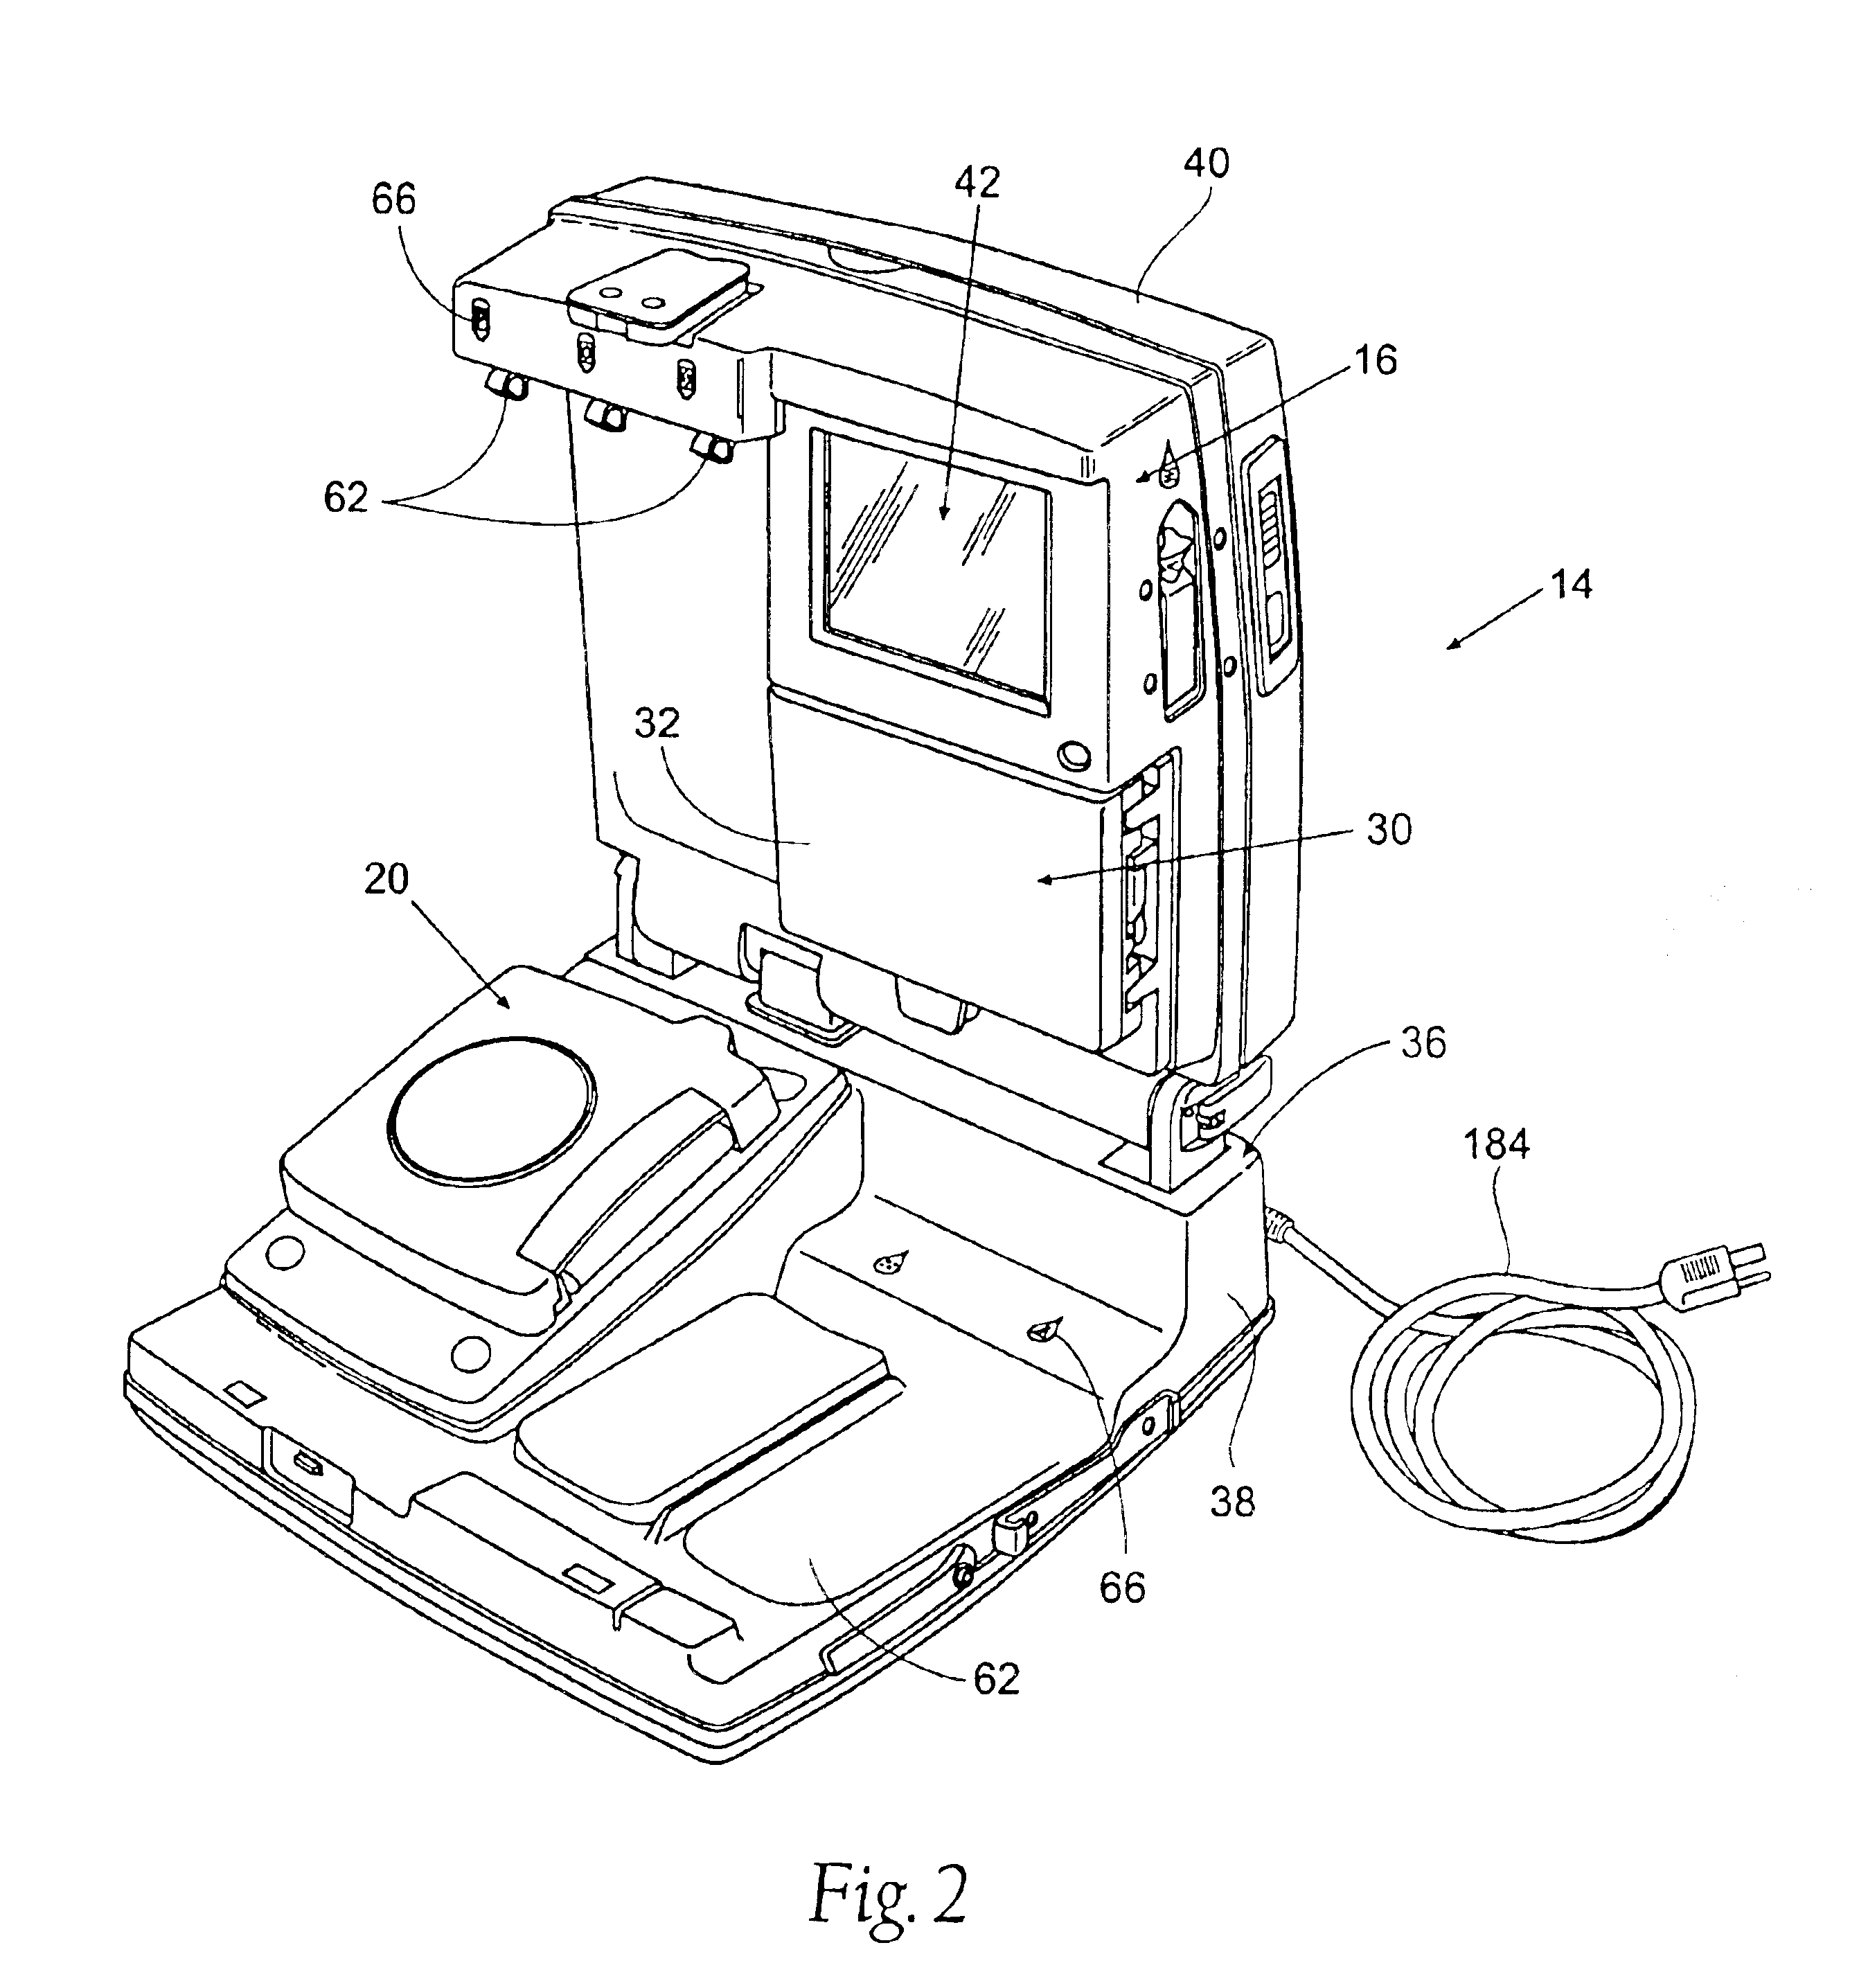 Blood component processing systems and methods using fluid-actuated pumping elements that are integrity tested prior to use